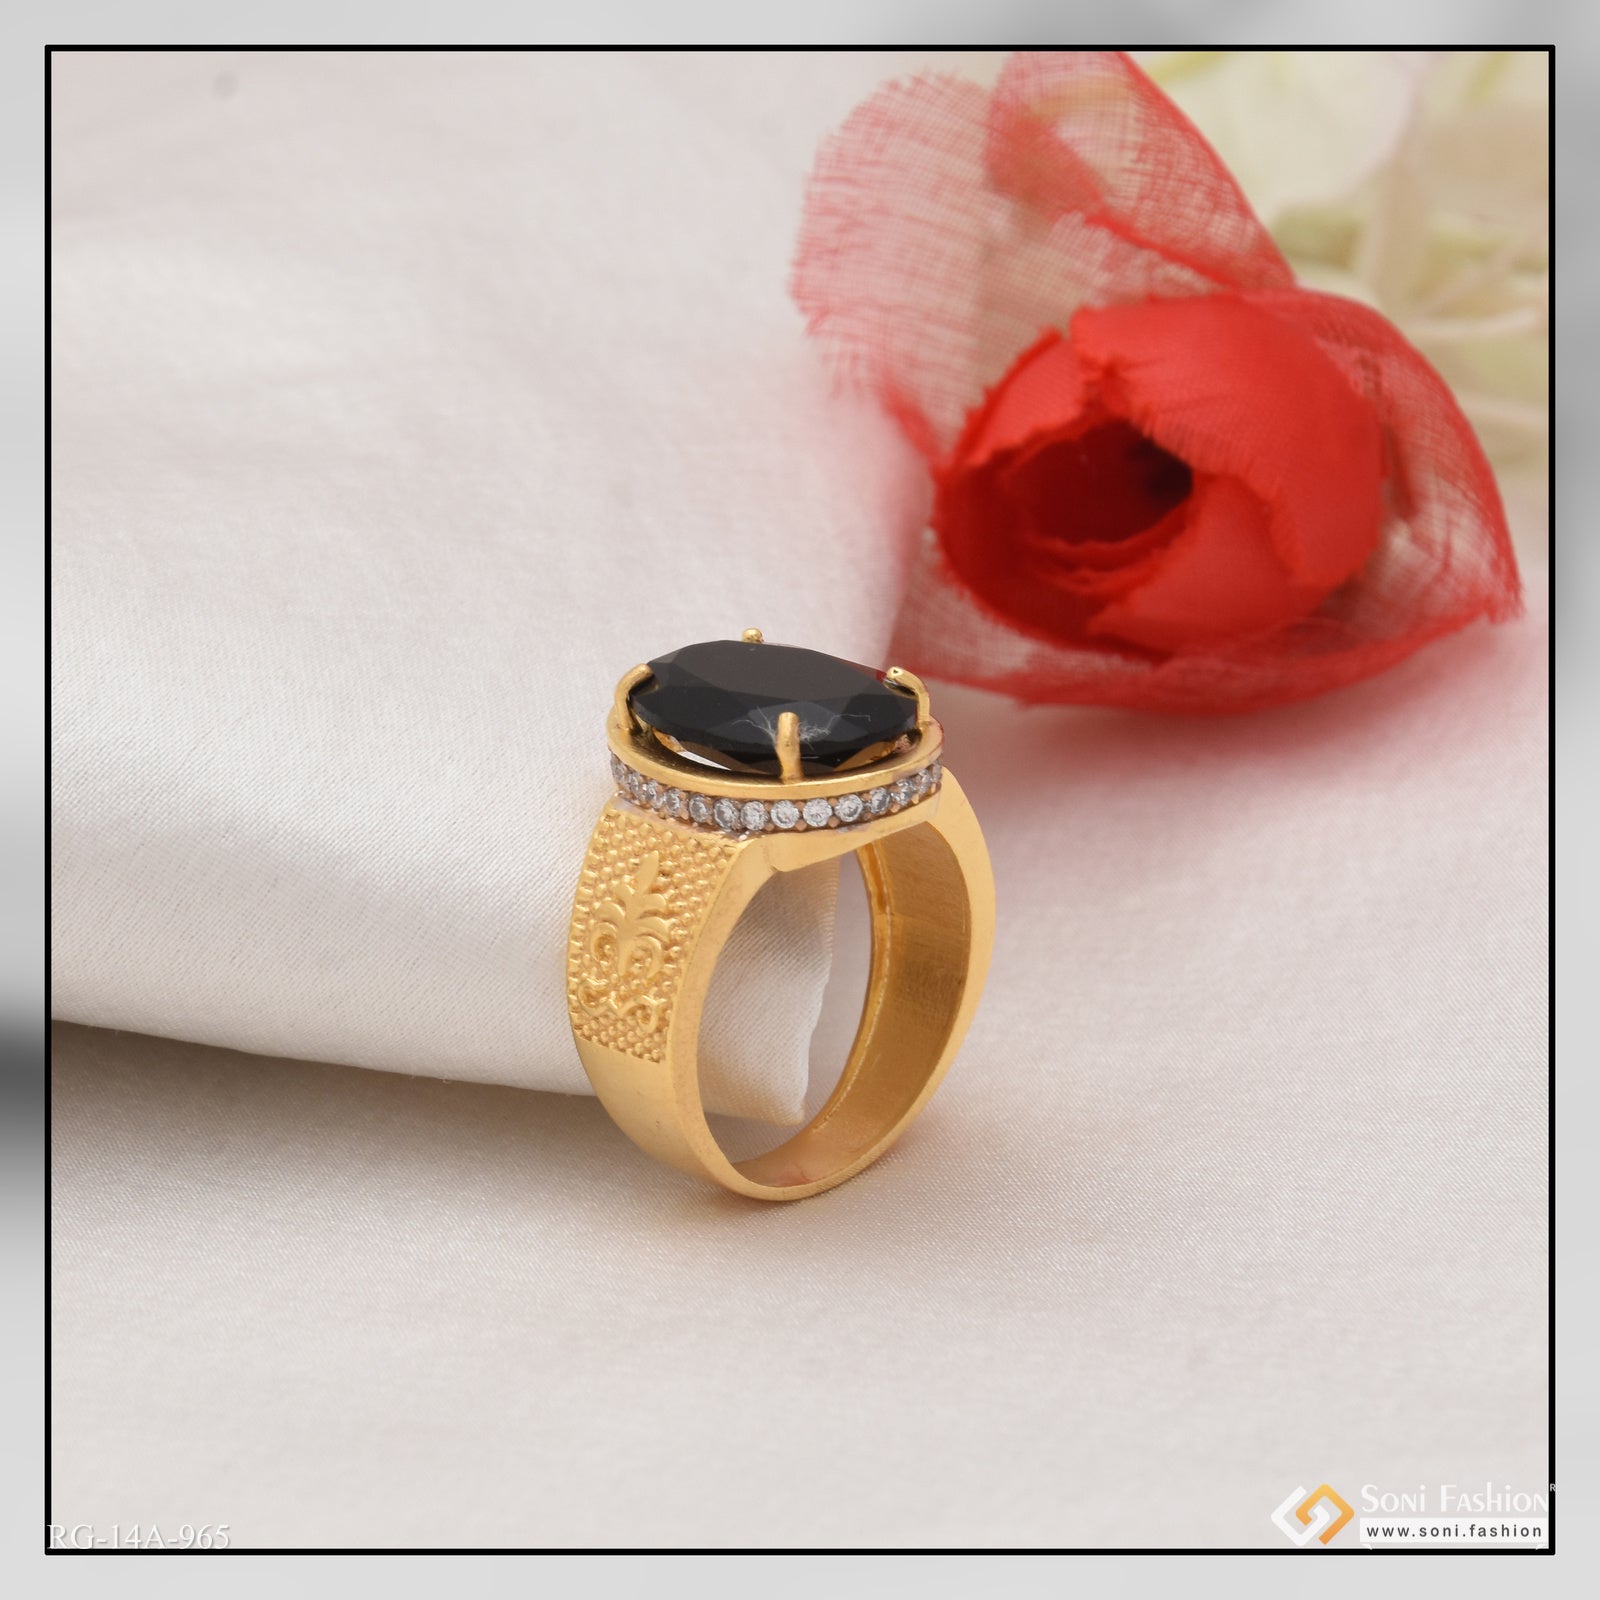 1 Gram Gold Forming Black Stone with Diamond Fashionable Design Ring - Style A965